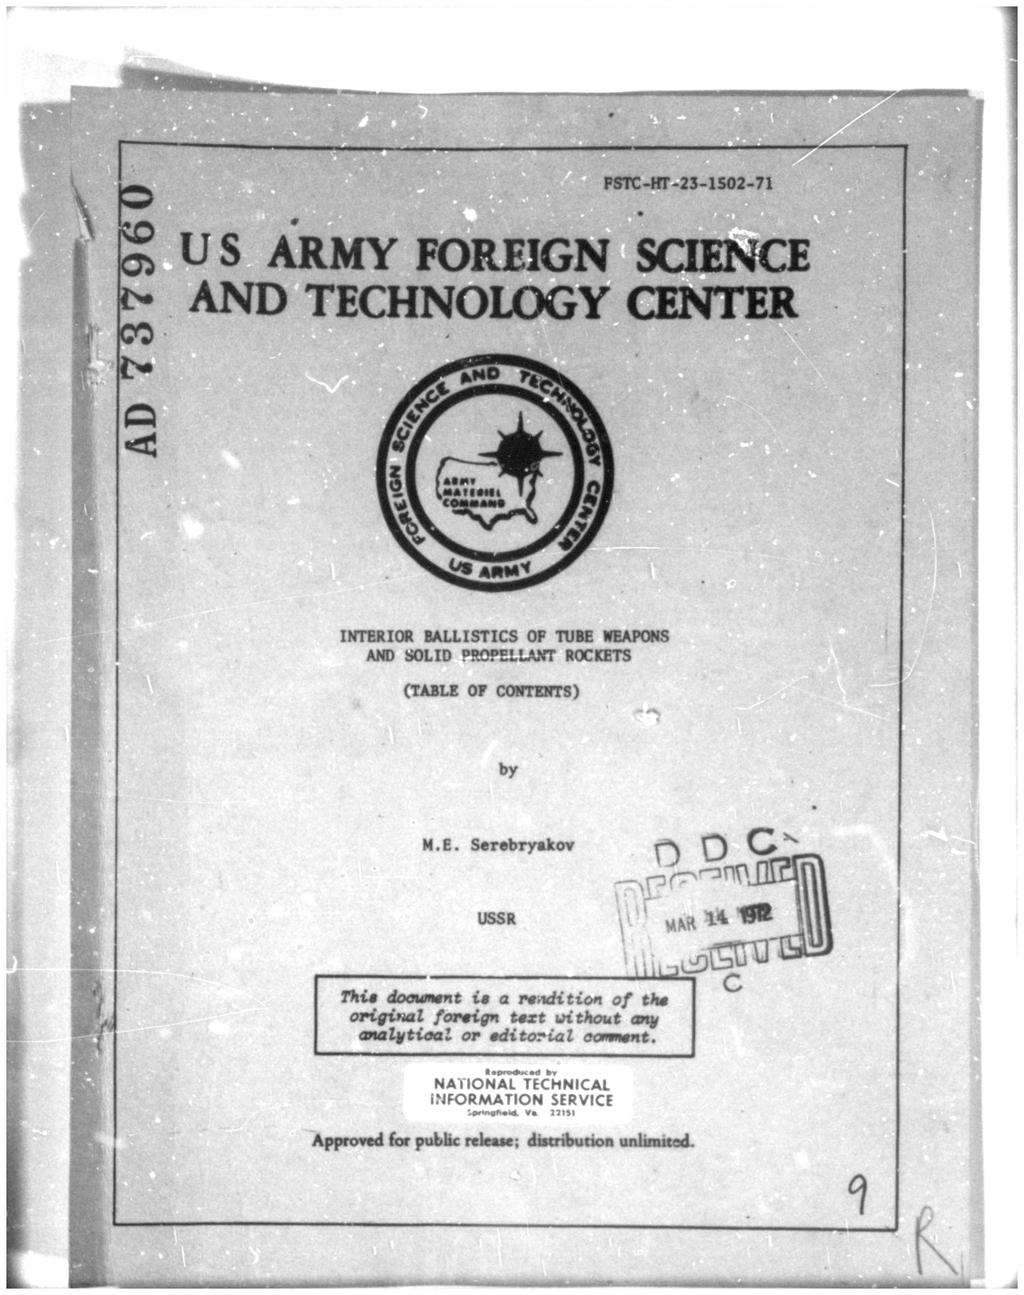 WTC-HT-25-1S02-71 M U S ARMY FOREIGN SCIENCE h AND TECHNOLOGY CENTER 1 II 2KTBR